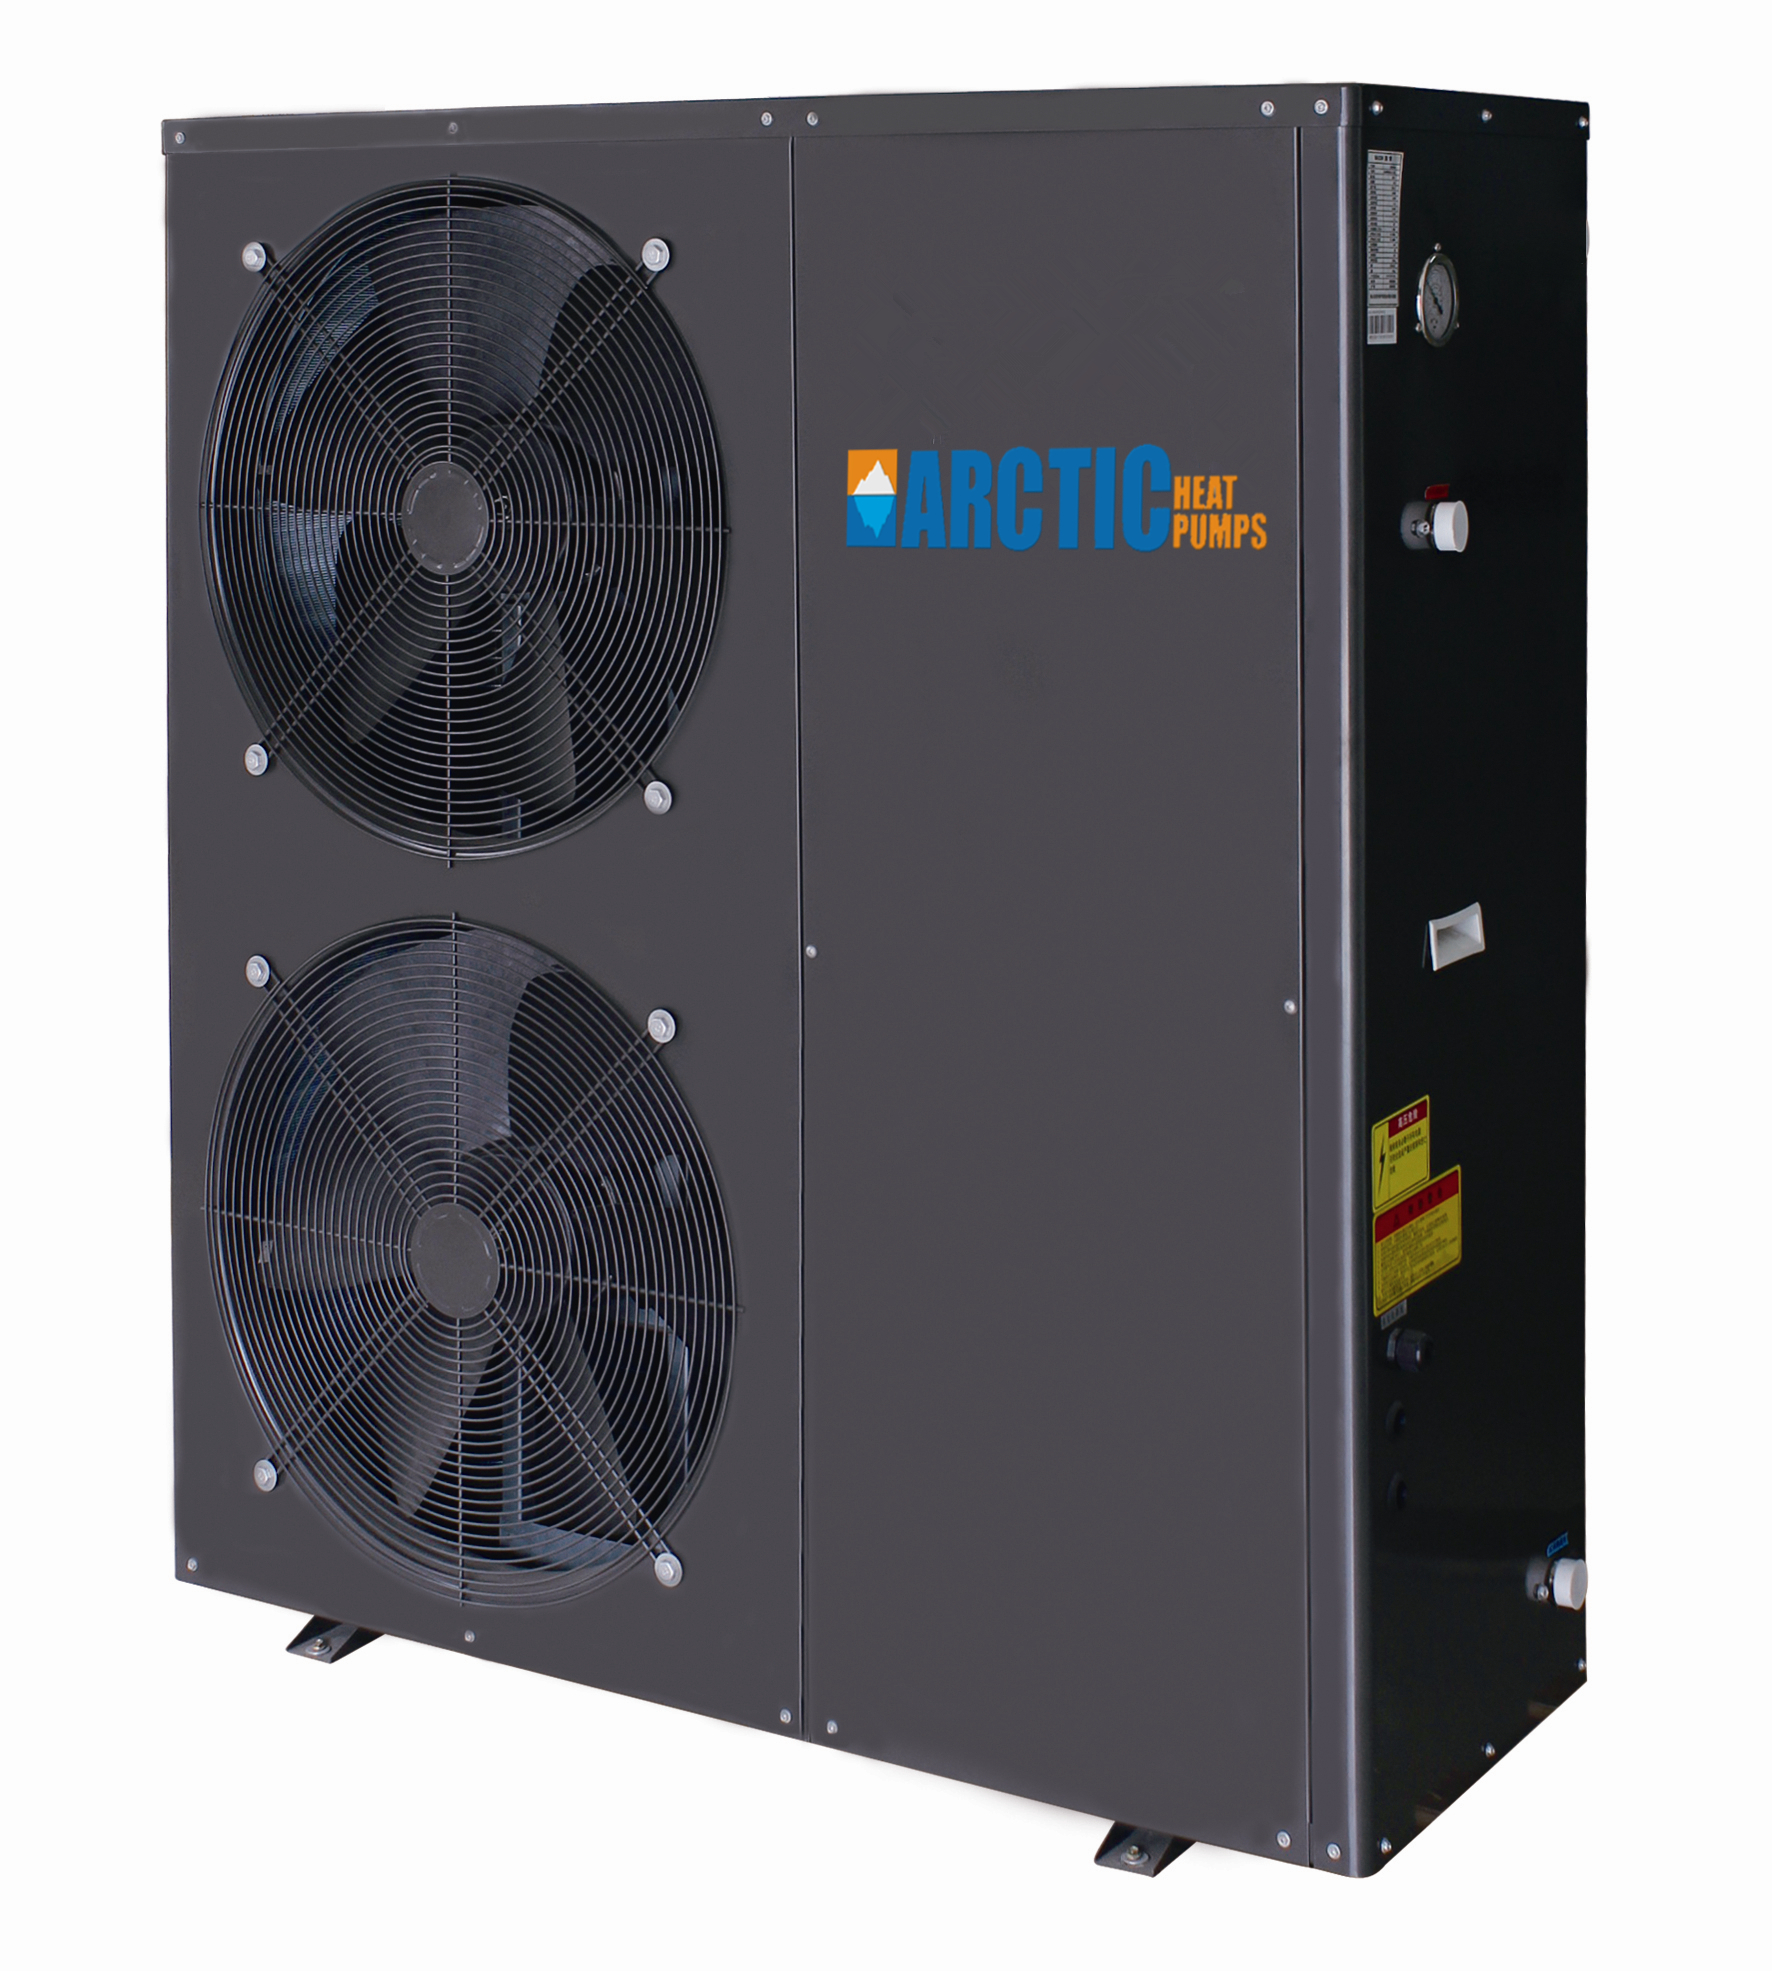 Arctic Hydronic Air to Water Heat Pump - 48,000 BTU with Cold Climate Inverter Technology